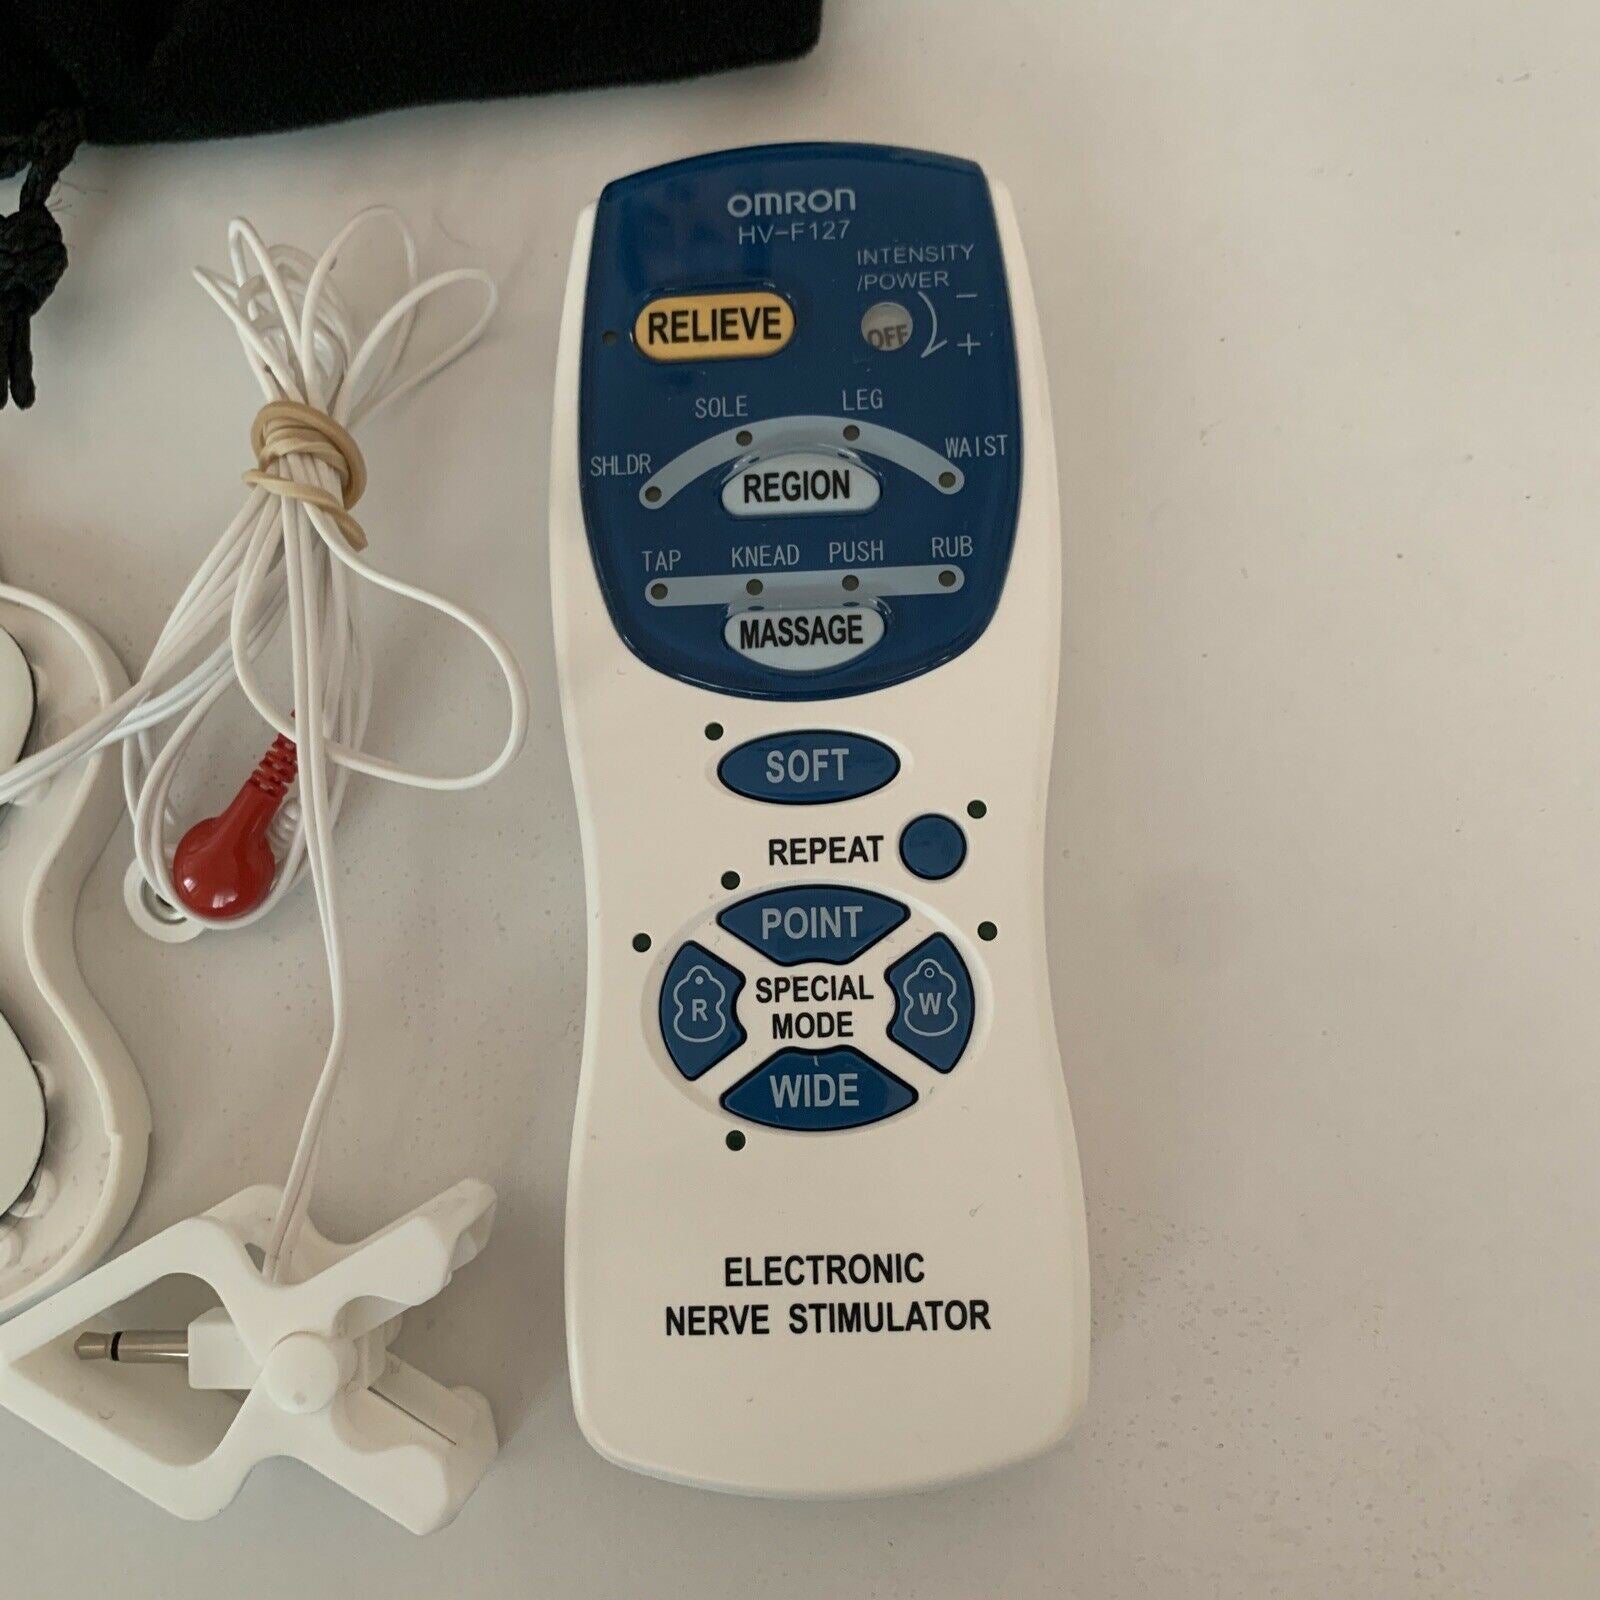 Omron T.E.N.S Therapy Device HV-F127